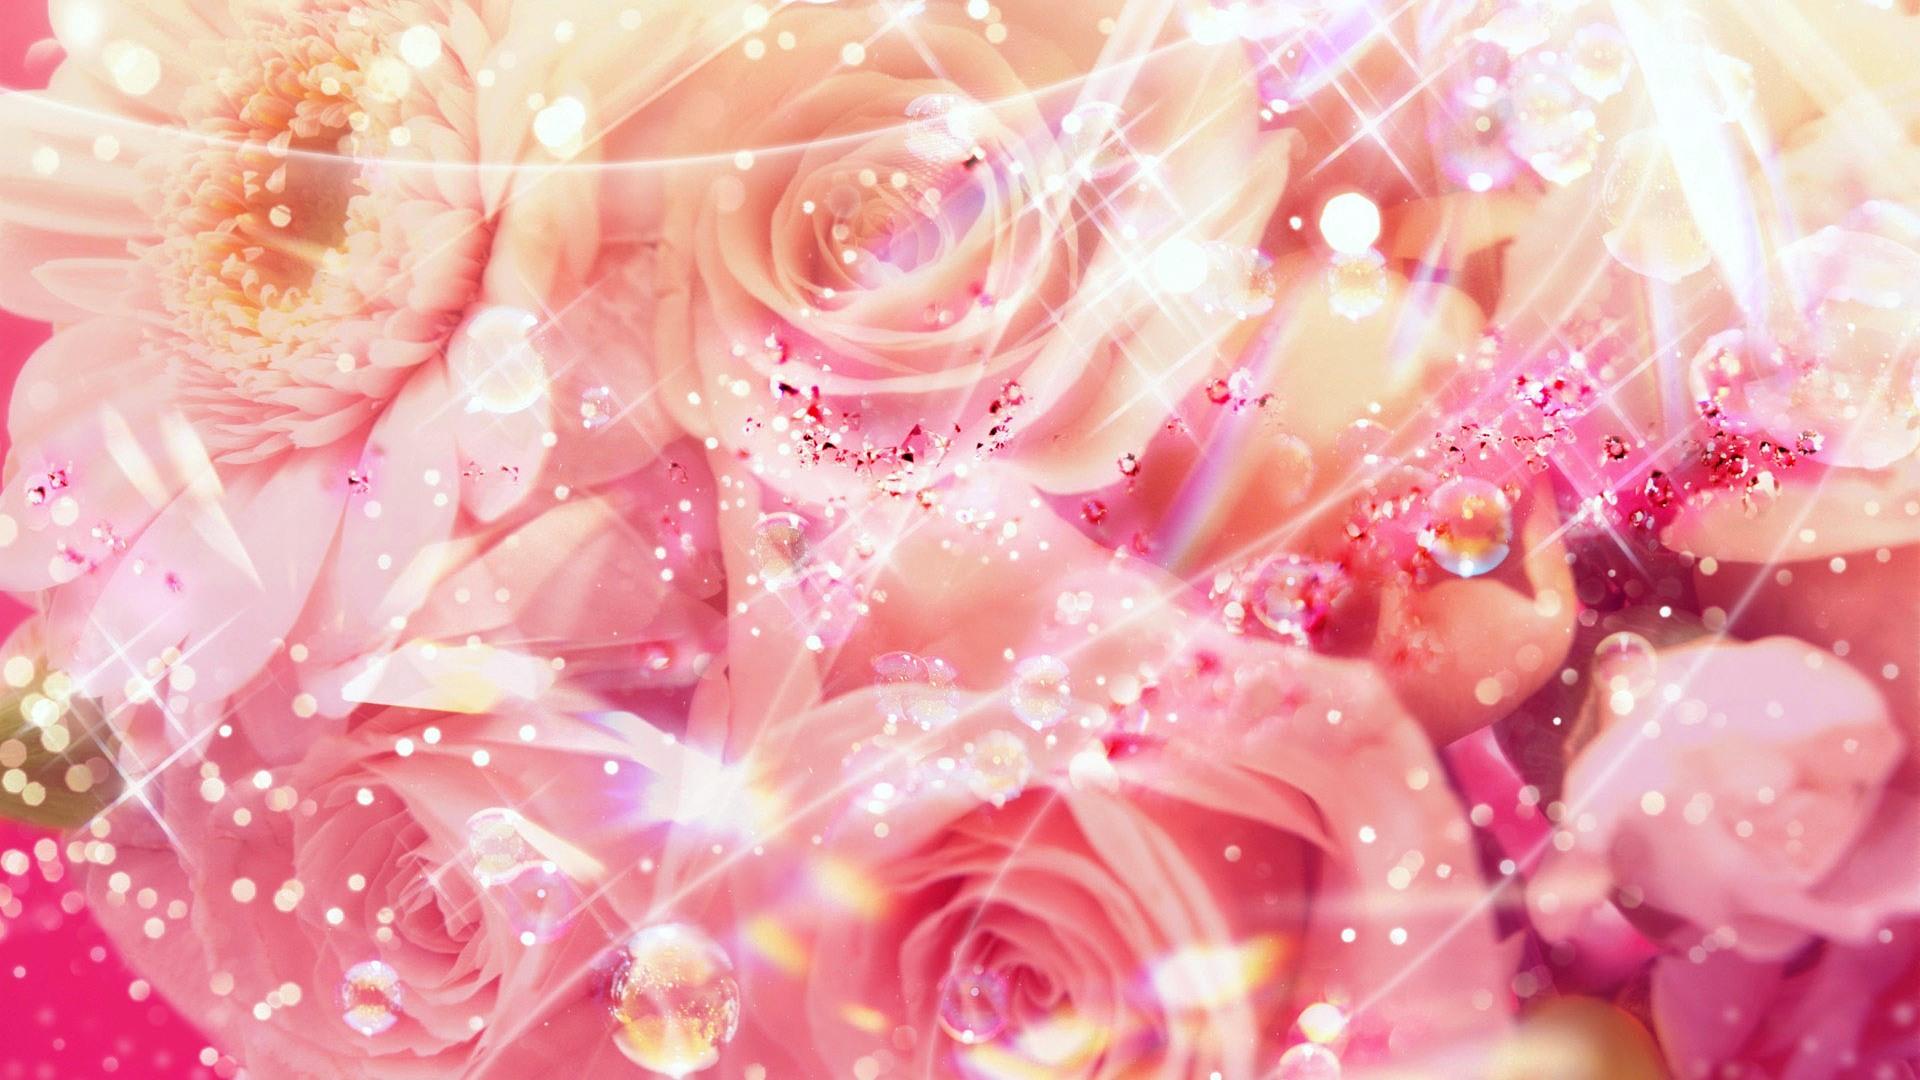 Shine of roses 1920x1080